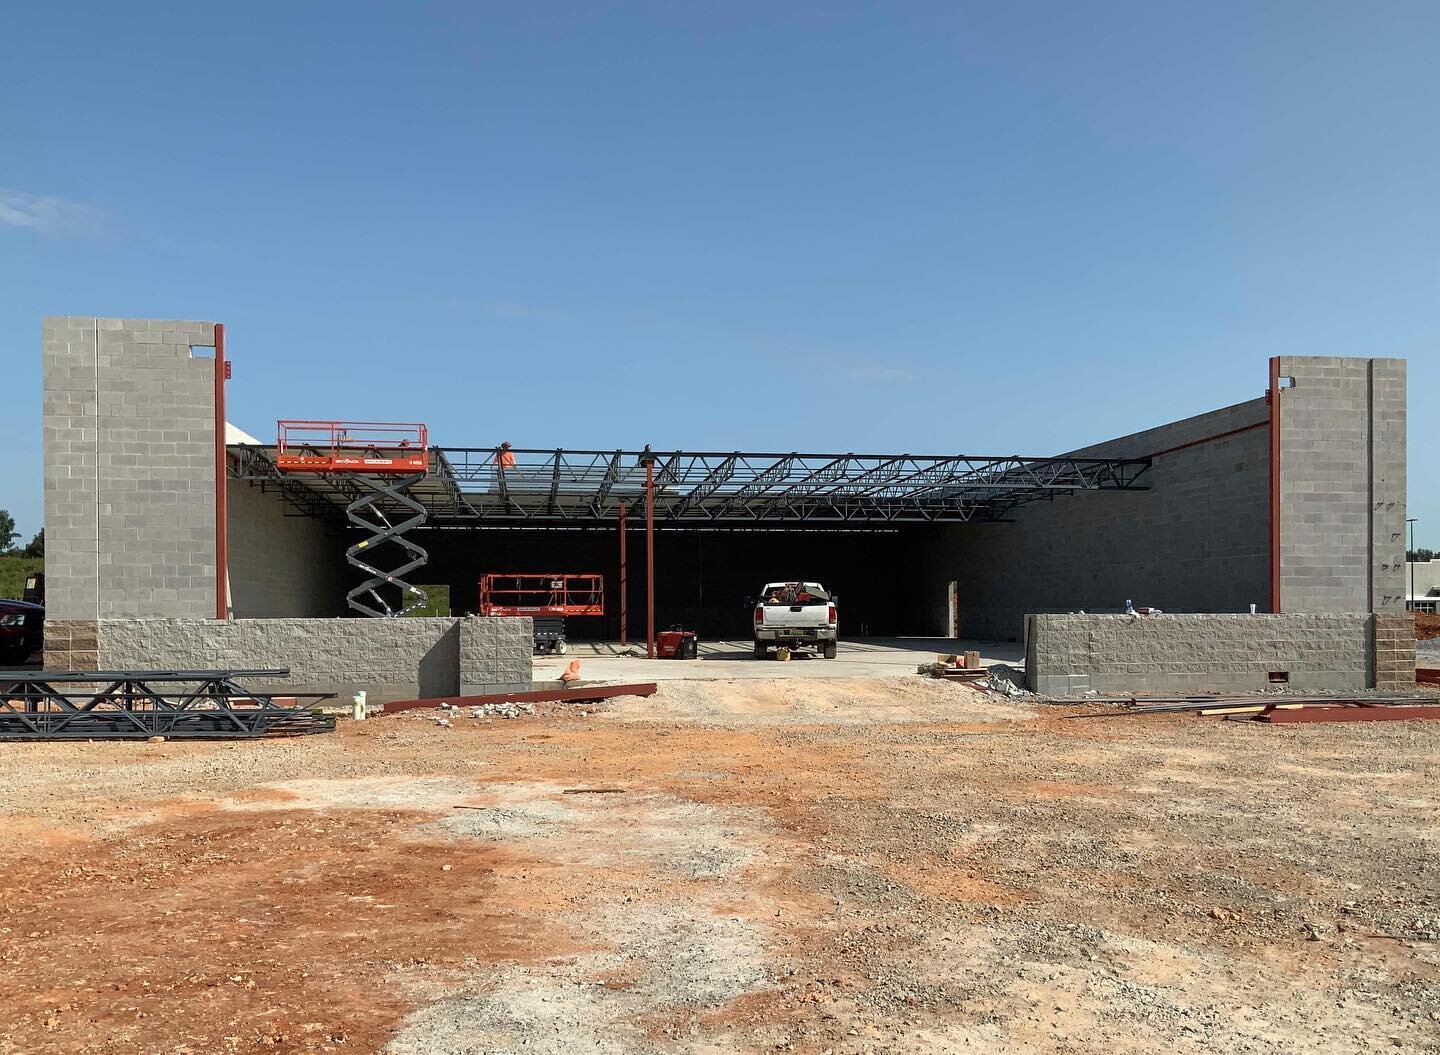 We&rsquo;re kicking this week off by setting bar joists at this retail project in Huntsville. #builtbetter